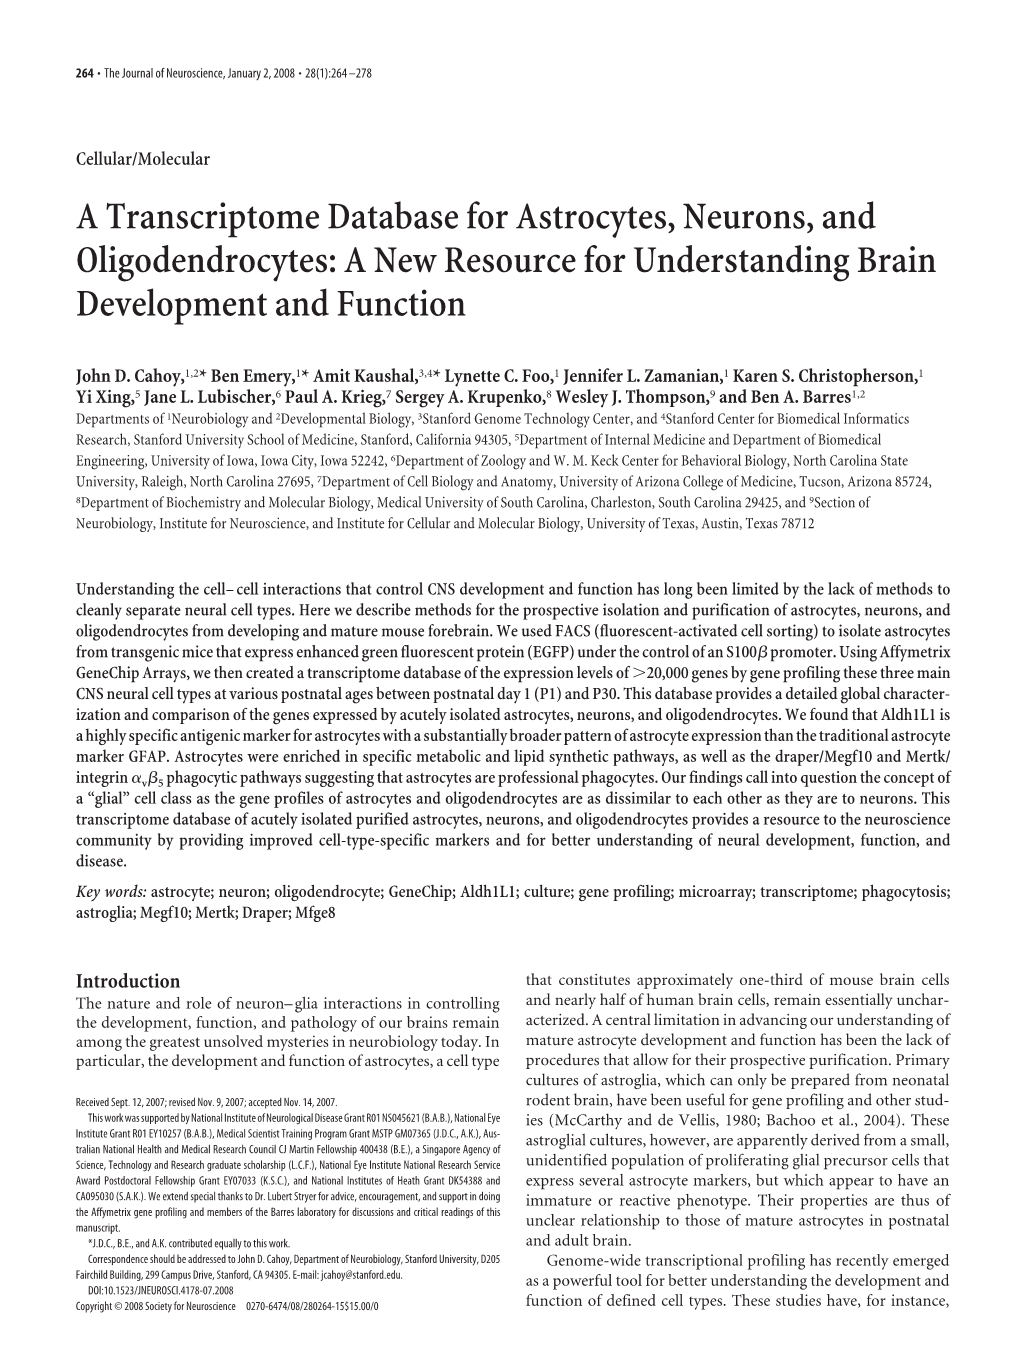 A Transcriptome Database for Astrocytes, Neurons, and Oligodendrocytes: a New Resource for Understanding Brain Development and Function